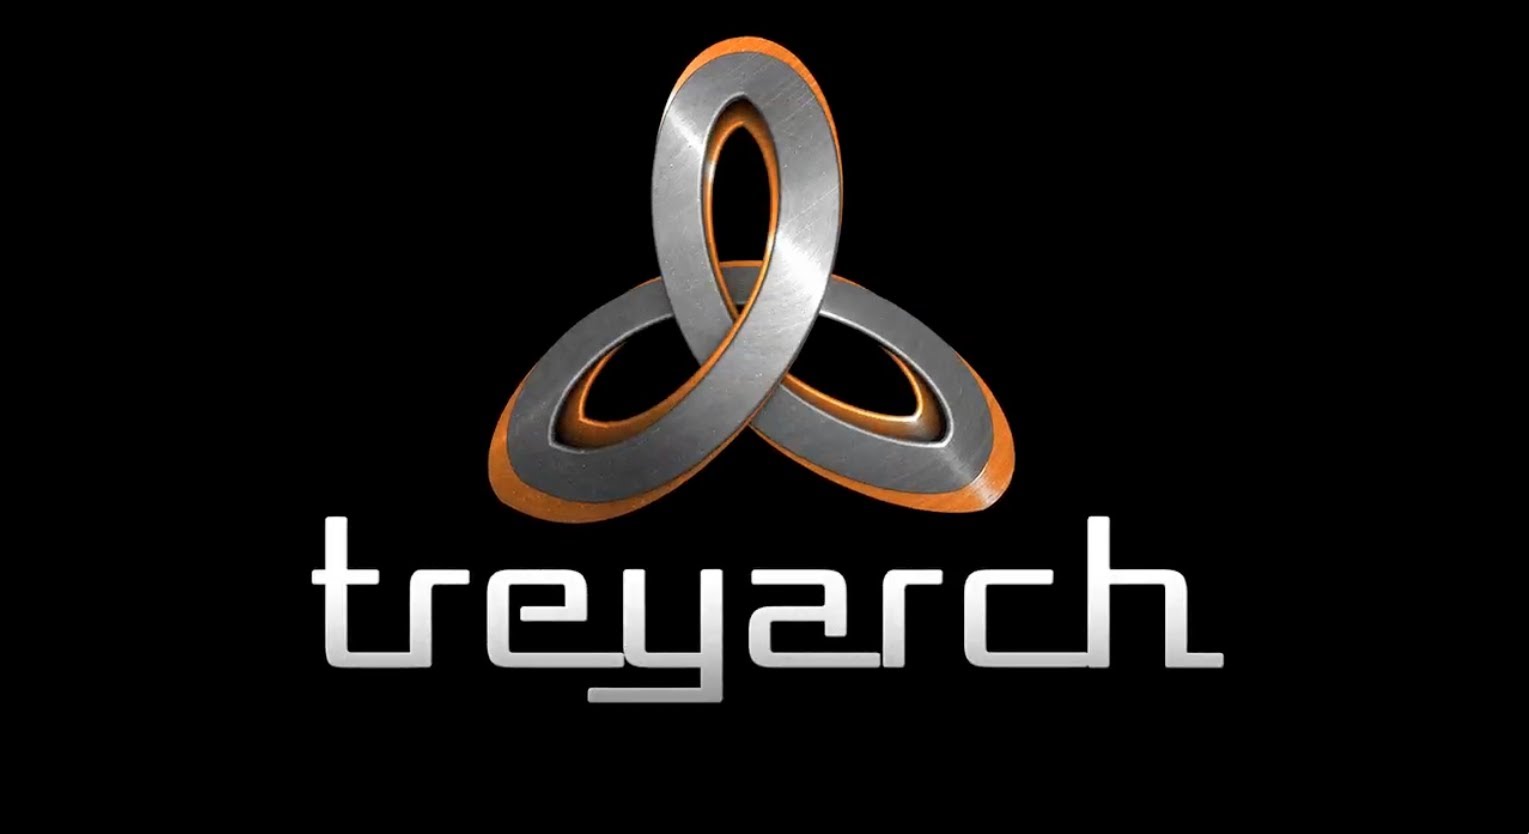 Call Of Duty Could Have A Modern Setting Based On Treyarch